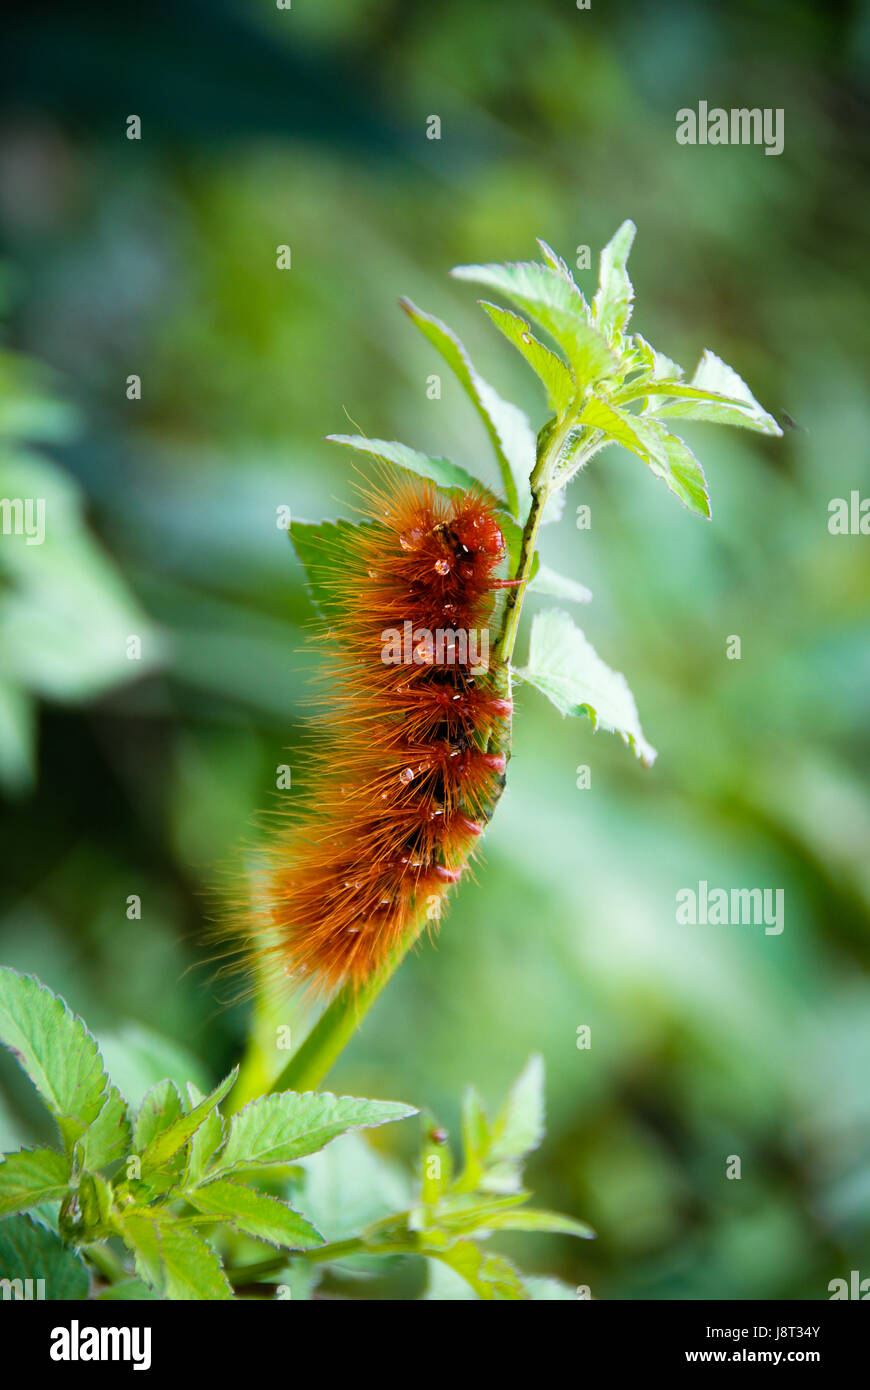 Insect Green Caterpillar Orange Nature Detail Colour Animal Insect Stock Photo Alamy